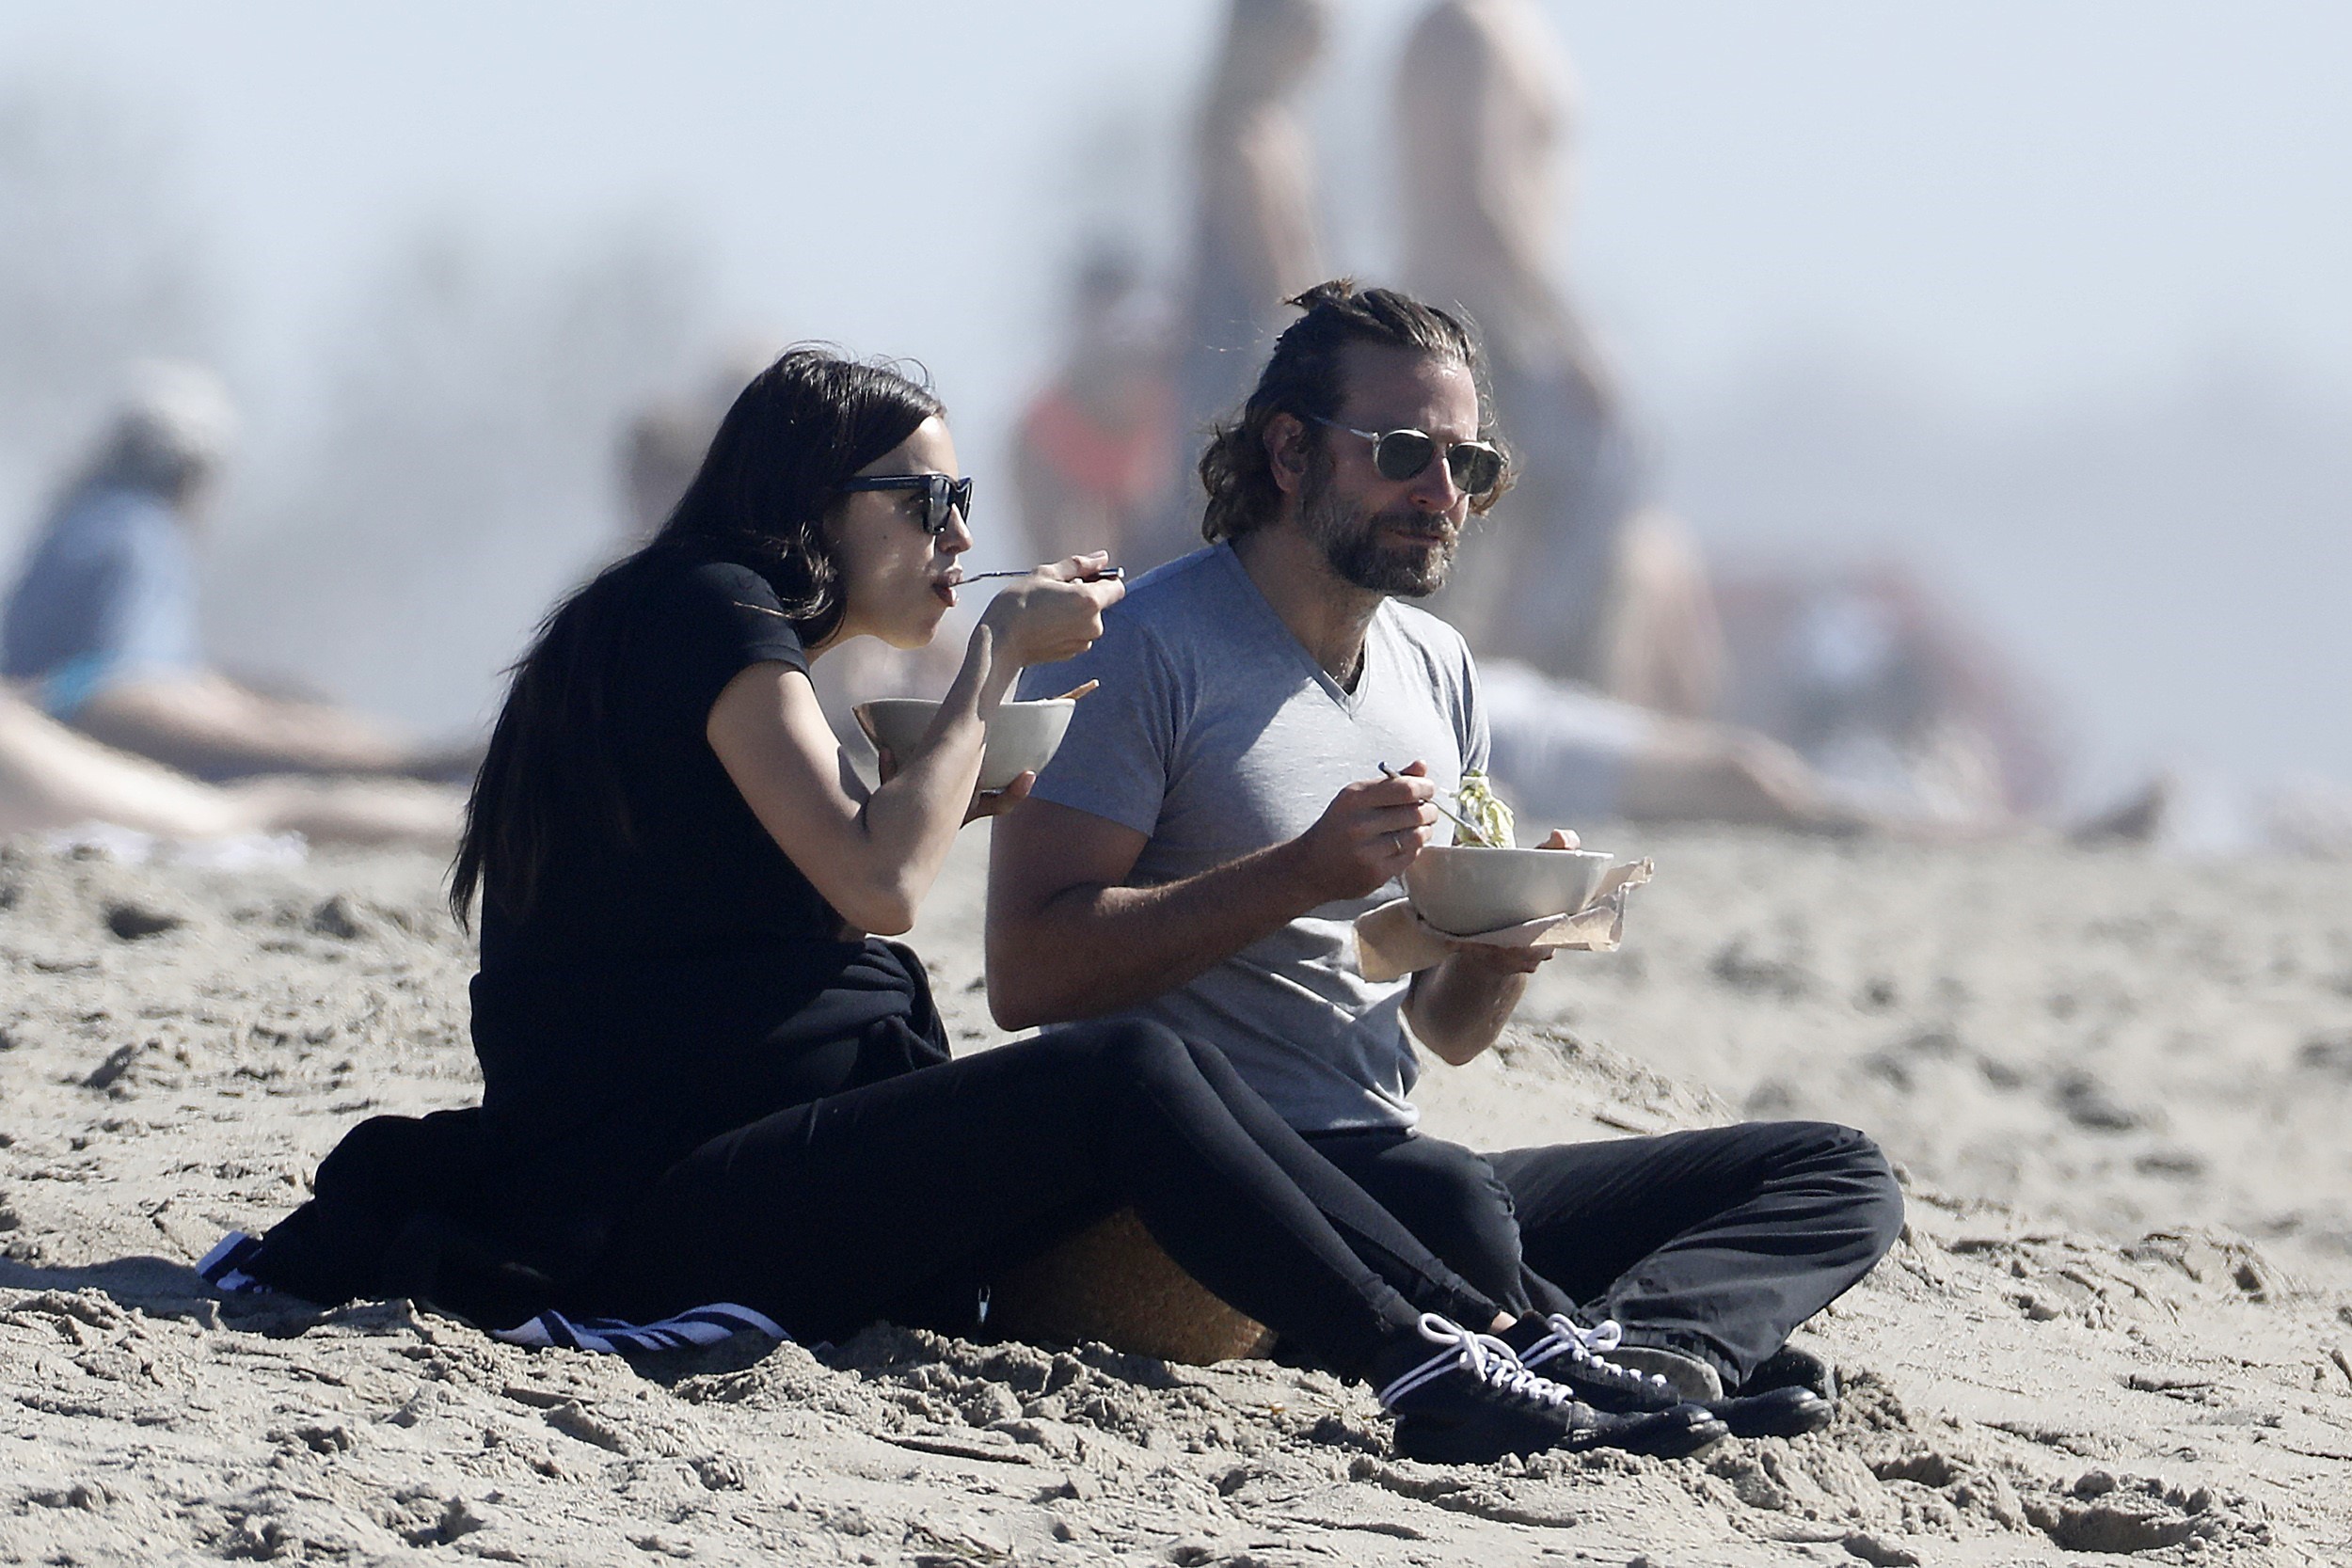 Photo © 2017 AKM GSI/The Grosby Group PREMIUM EXCLUSIVE Los Angeles, February 14, 2017. Bradley Cooper and Irina Shayk bring their own lunch to the beach and cuddle after enjoying their meal. The couple look sweet and in love as Bradley helps Irina stand up so they can leave hand in hand.